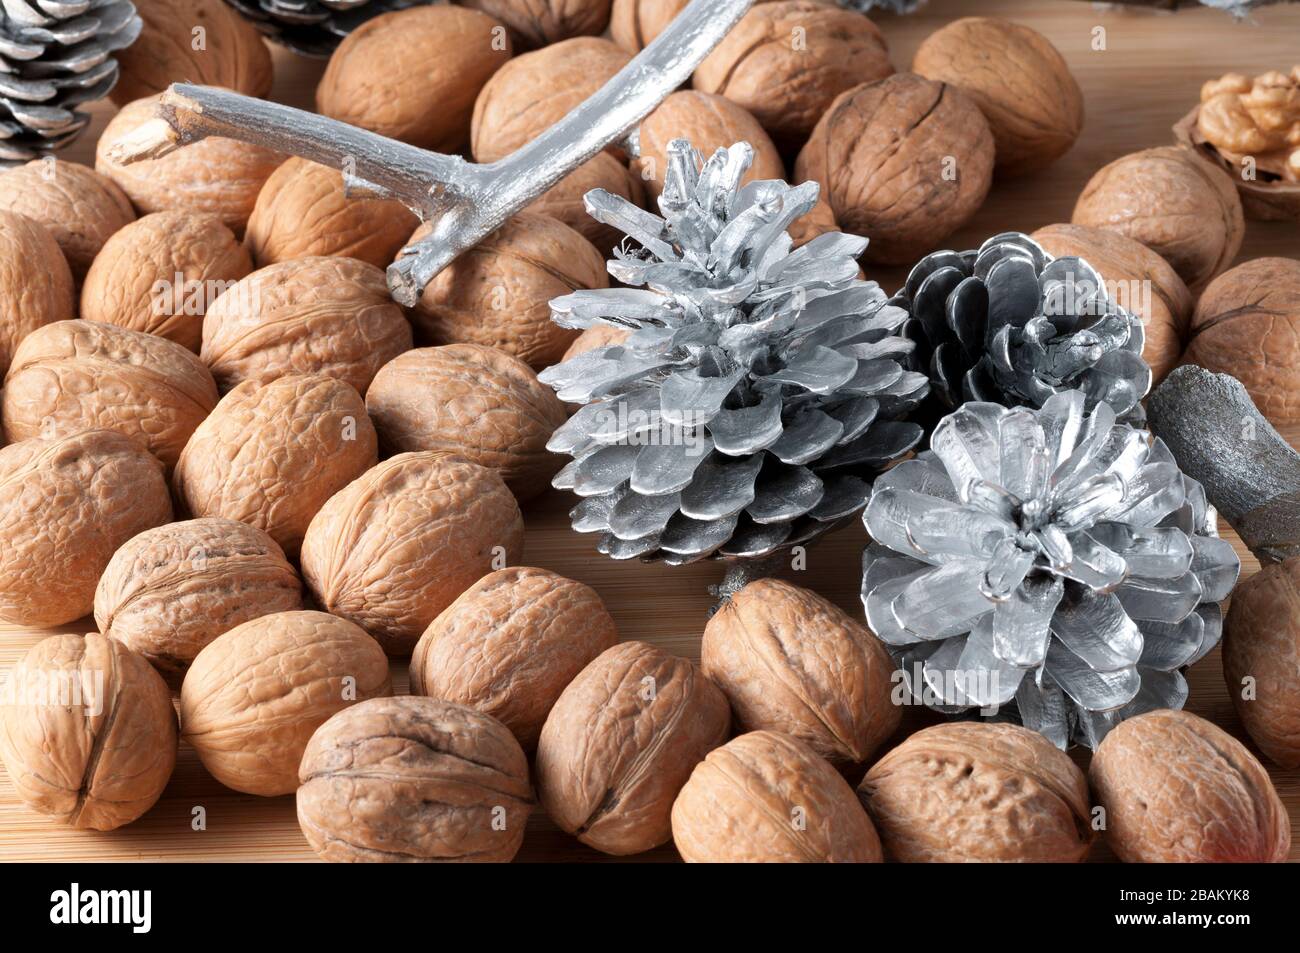 walnuts in the foreground for diet Stock Photo